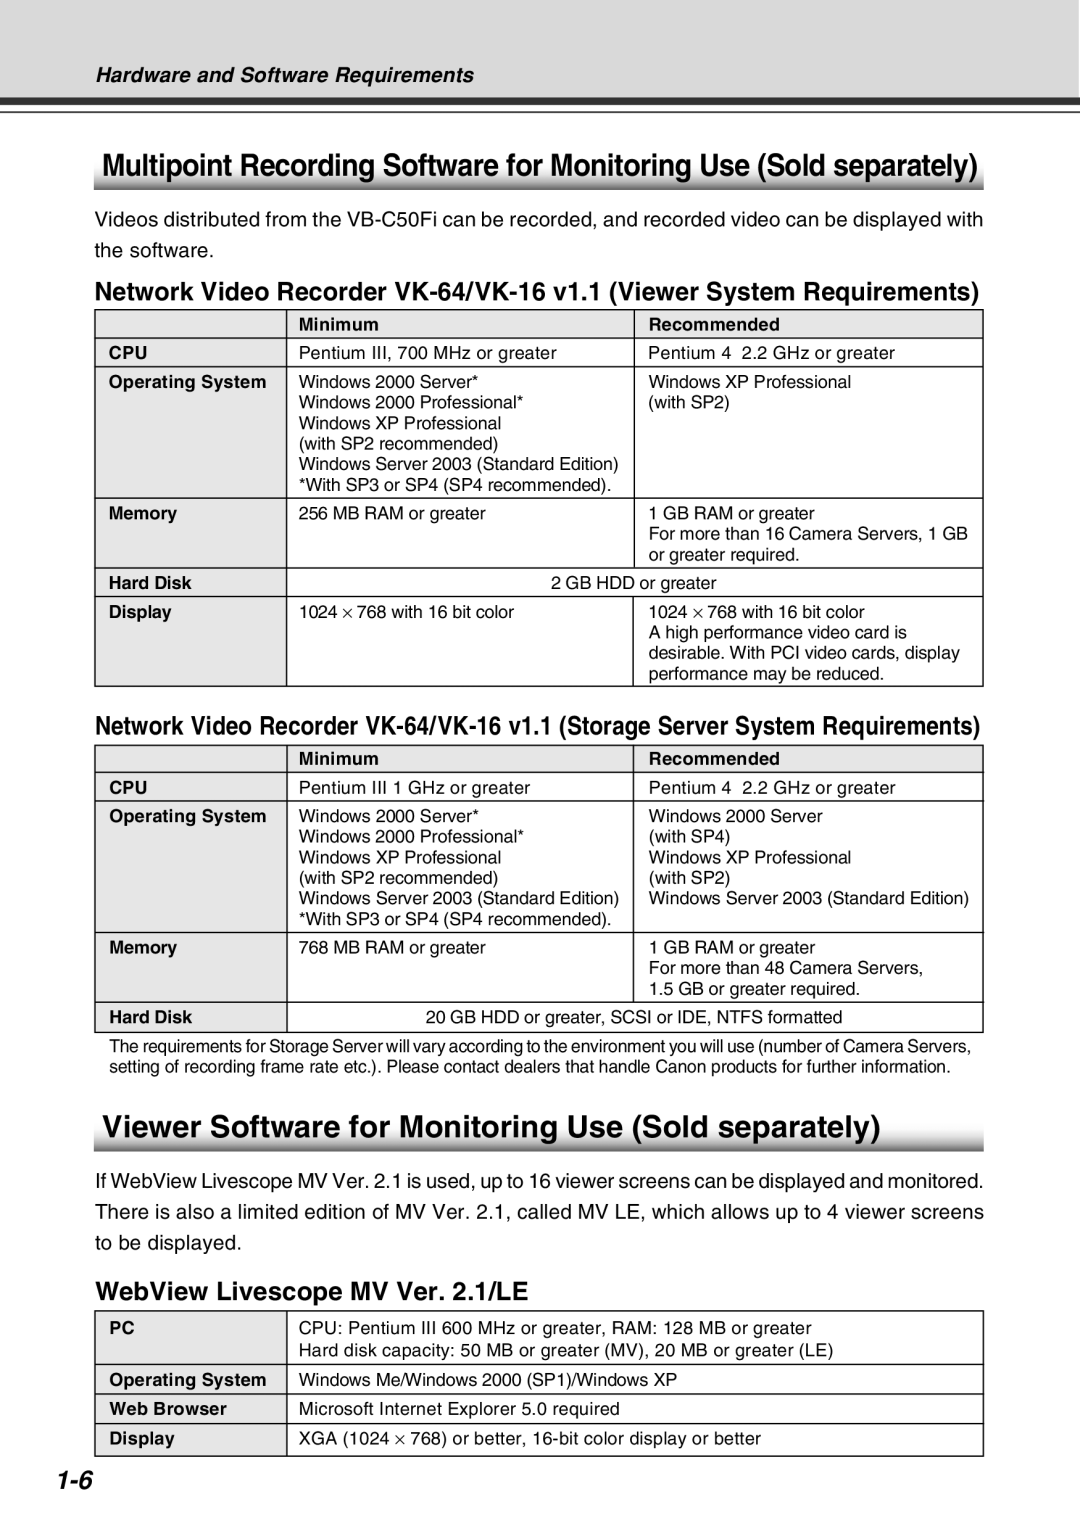 Canon Vb-C50fi user manual WebView Livescope MV Ver. 2.1/LE, Hardware and Software Requirements 